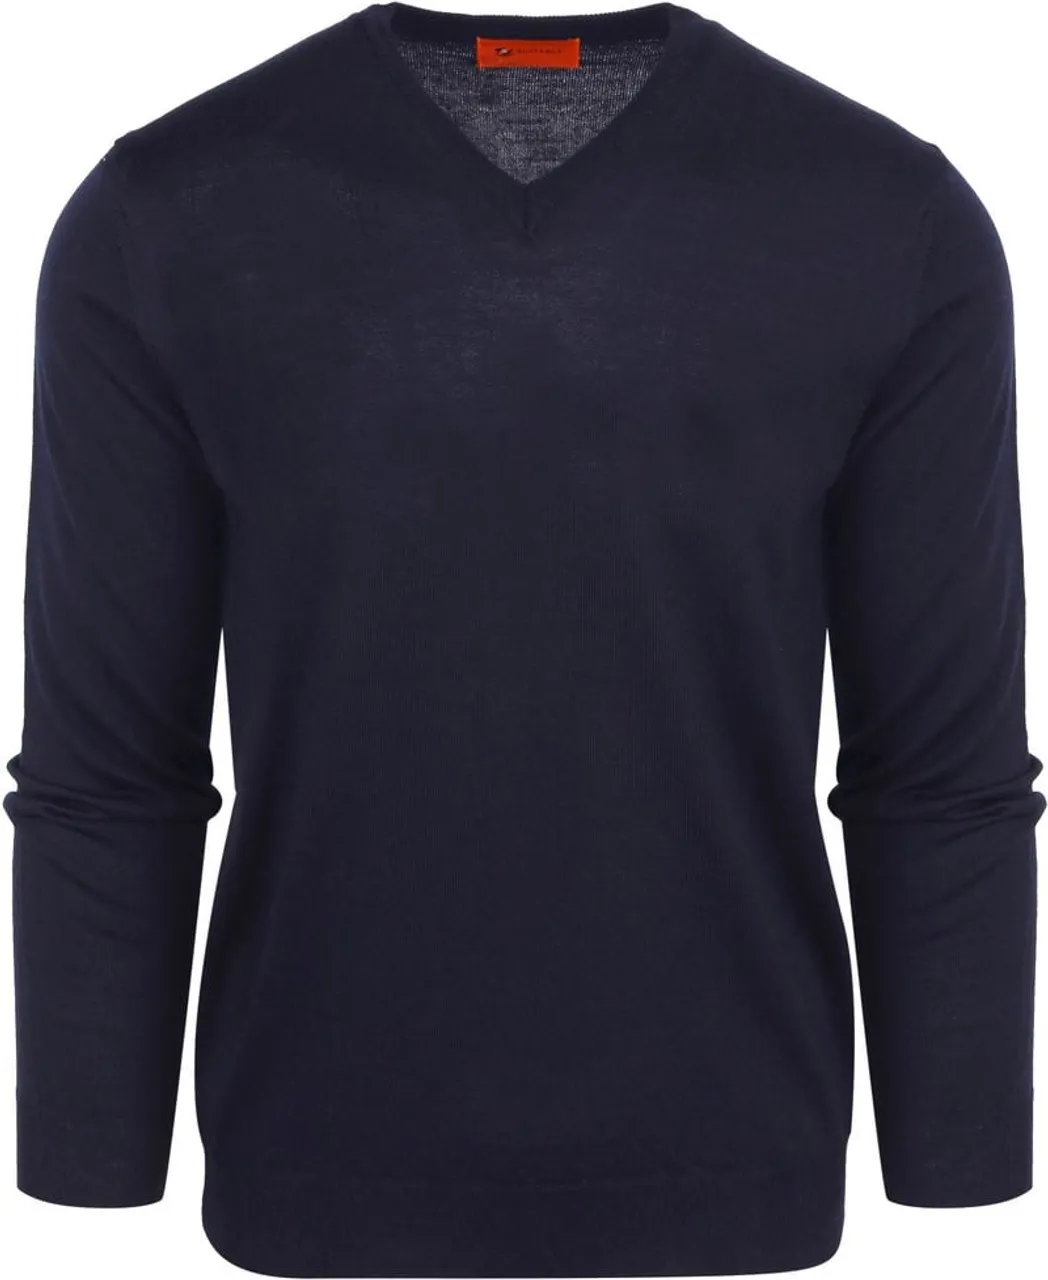 Suitable Pullover V-Hals Wol Donkerblauw